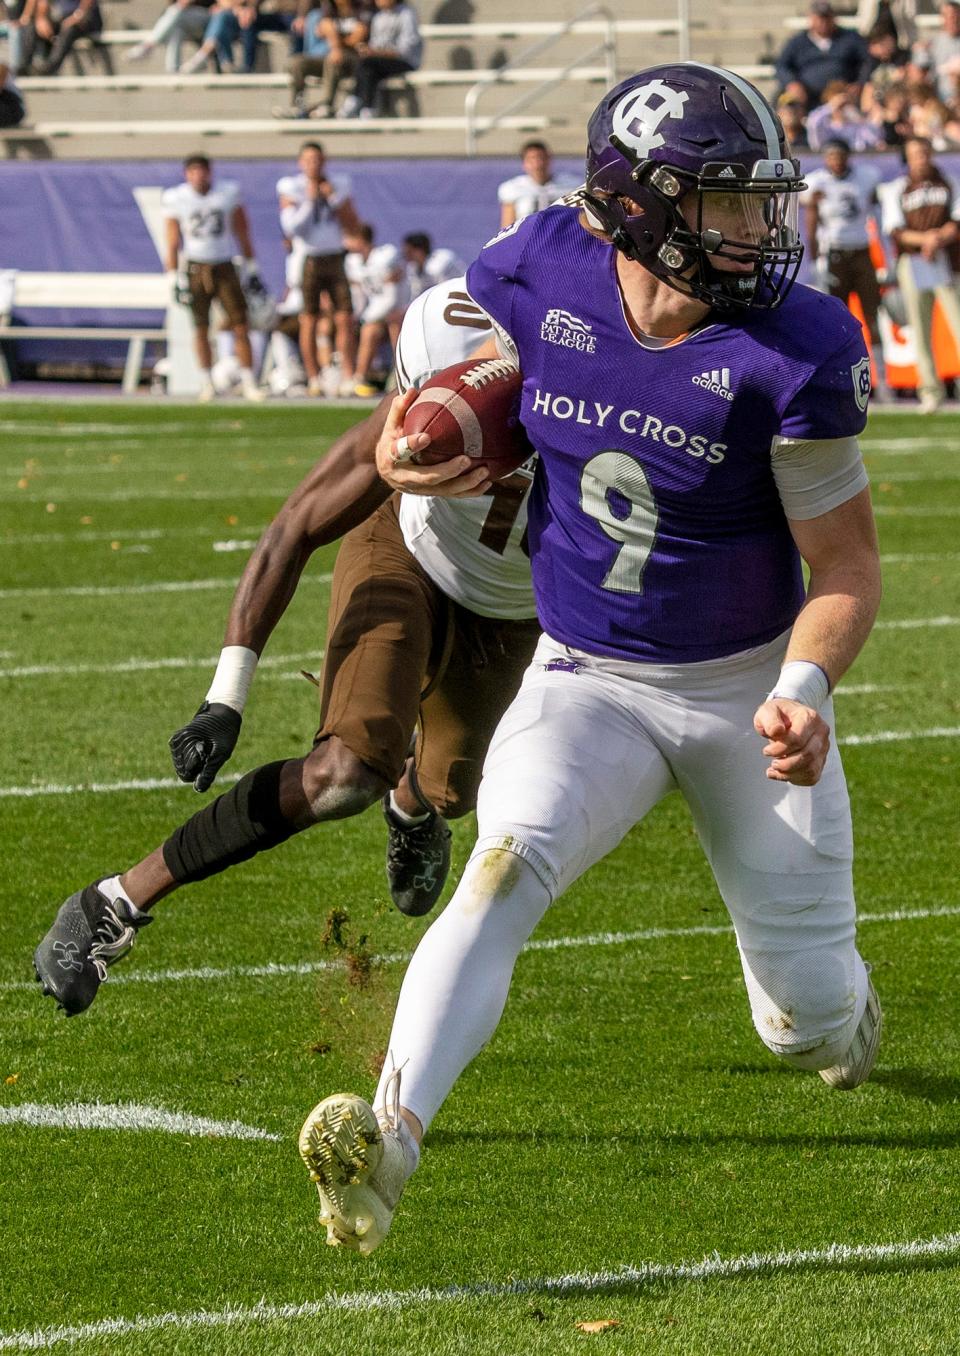 Holy Cross quarterback Matthew Sluka runs for a first down, setting up a first-quarter touchdown during Saturday's game against Lehigh at Fitton Field.